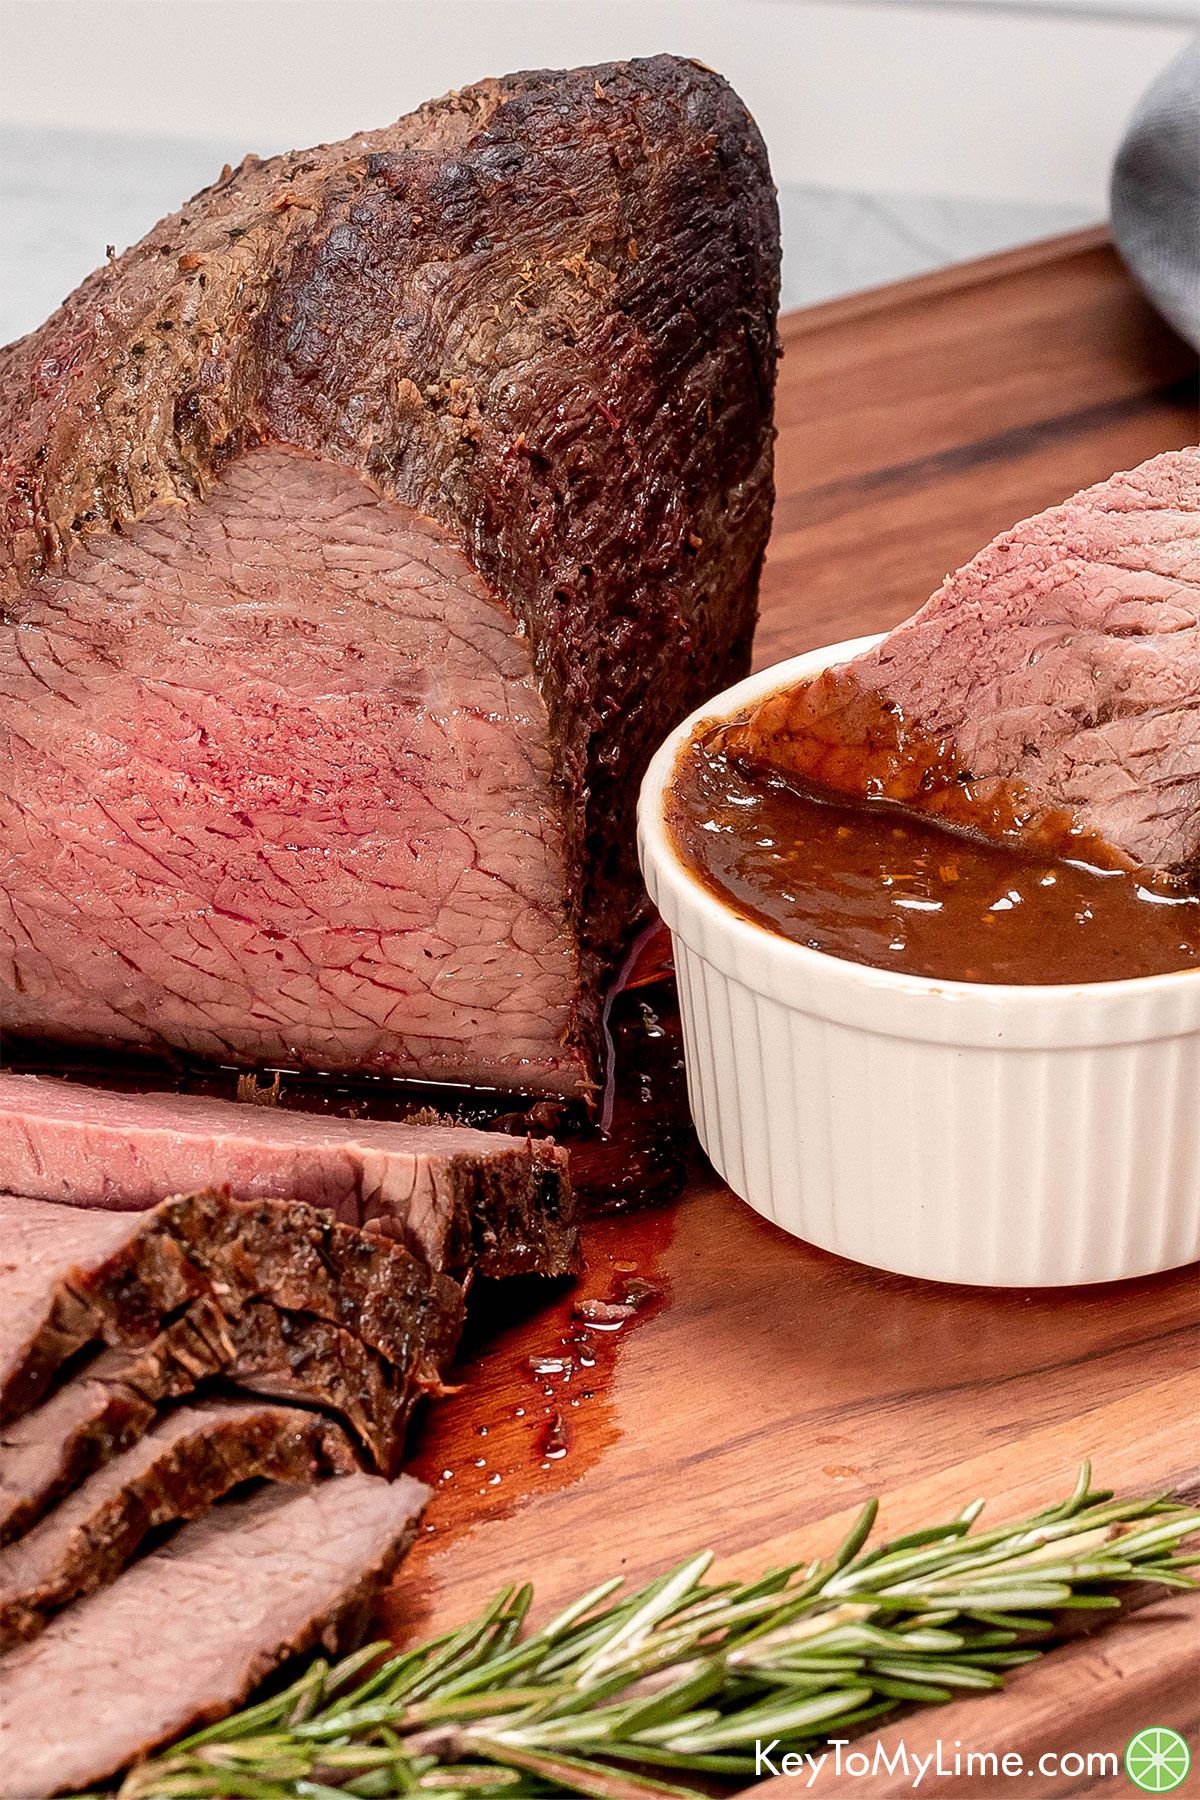 A close up image of a slice of juicy beef roast dipped in a homemade gravy.